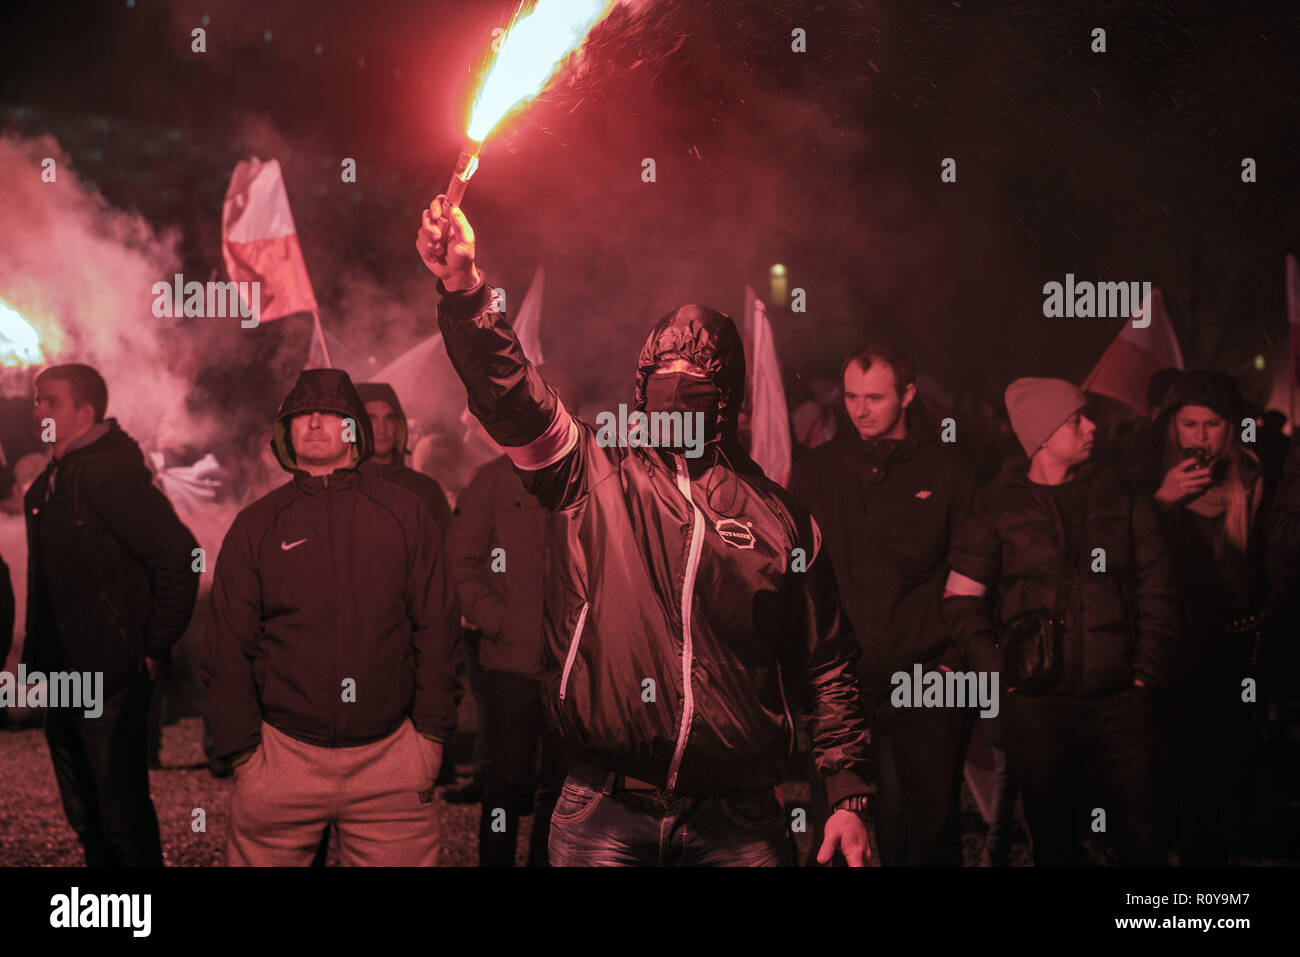 November 11, 2017 - Warsaw, mazowieckie, Poland - A masked nationalists seen burning flairs on the Independence Day during the demonstration.Last year about 60,000 people took part in the nationalist march marking Poland's Independence Day, according to police figures. The march has taken place each year on November 11th for almost a decade, and has grown to draw tens of thousands of participants, including extremists from across the EU.Warsaw's mayor Hanna Gronkiewicz-Waltz has banned the event. Organizers said they would appeal against the decision, insisting they would go ahead with t Stock Photo